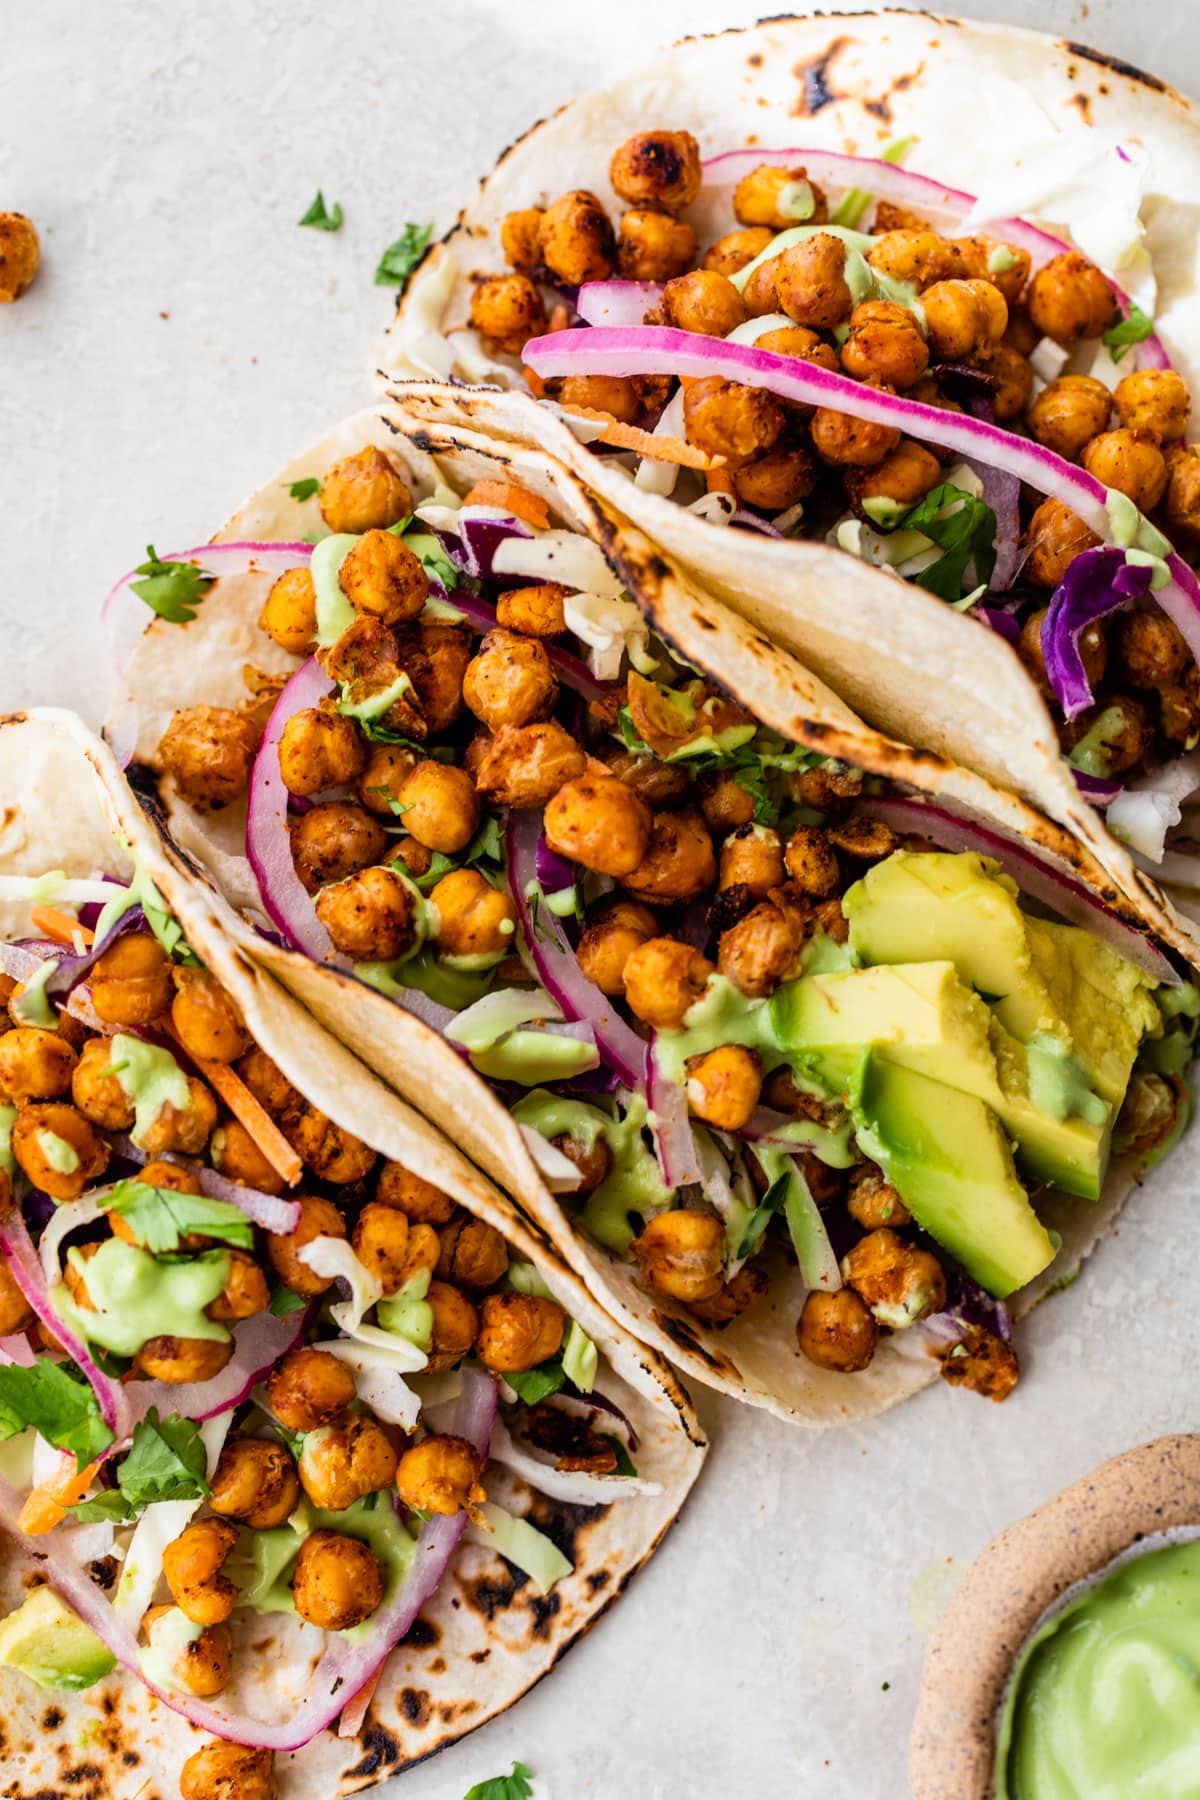 three tacos filled with chickpeas